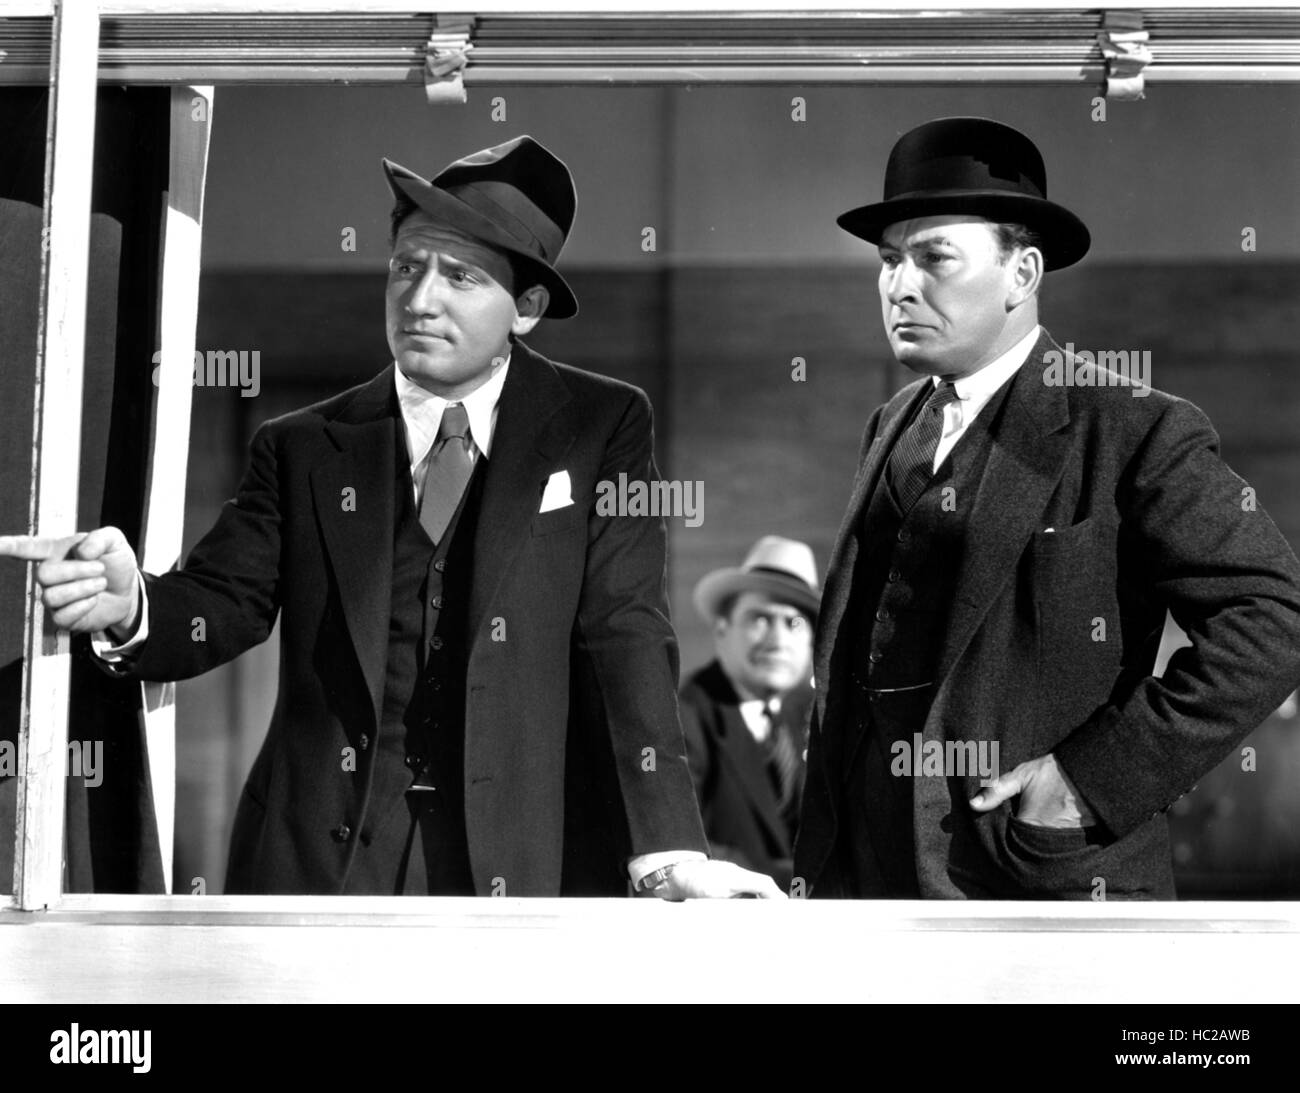 THE MURDER MAN, Spencer Tracy, Lionel Atwill, 1935 Stock Photo - Alamy